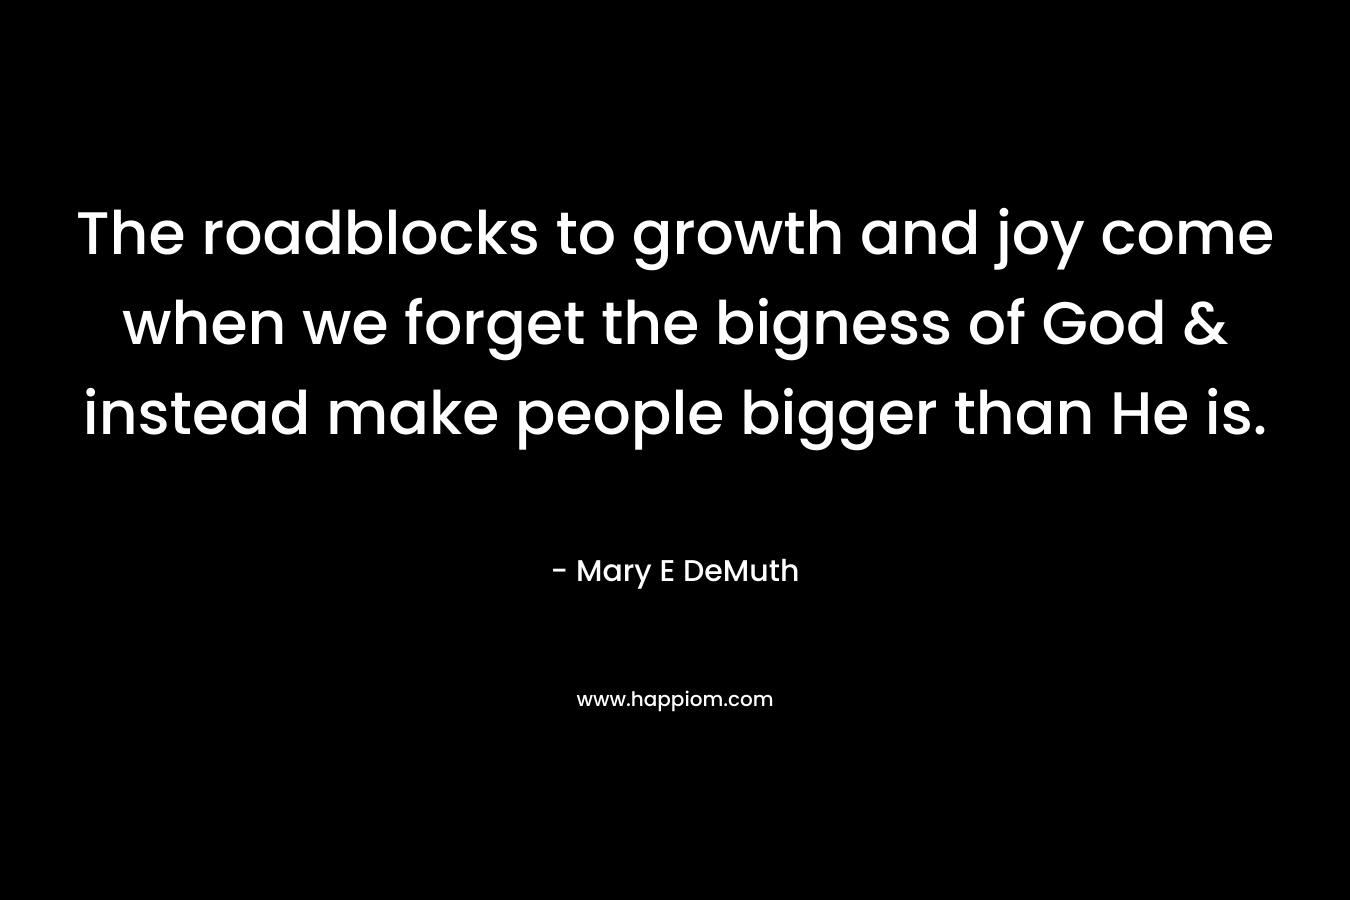 The roadblocks to growth and joy come when we forget the bigness of God & instead make people bigger than He is. – Mary E DeMuth